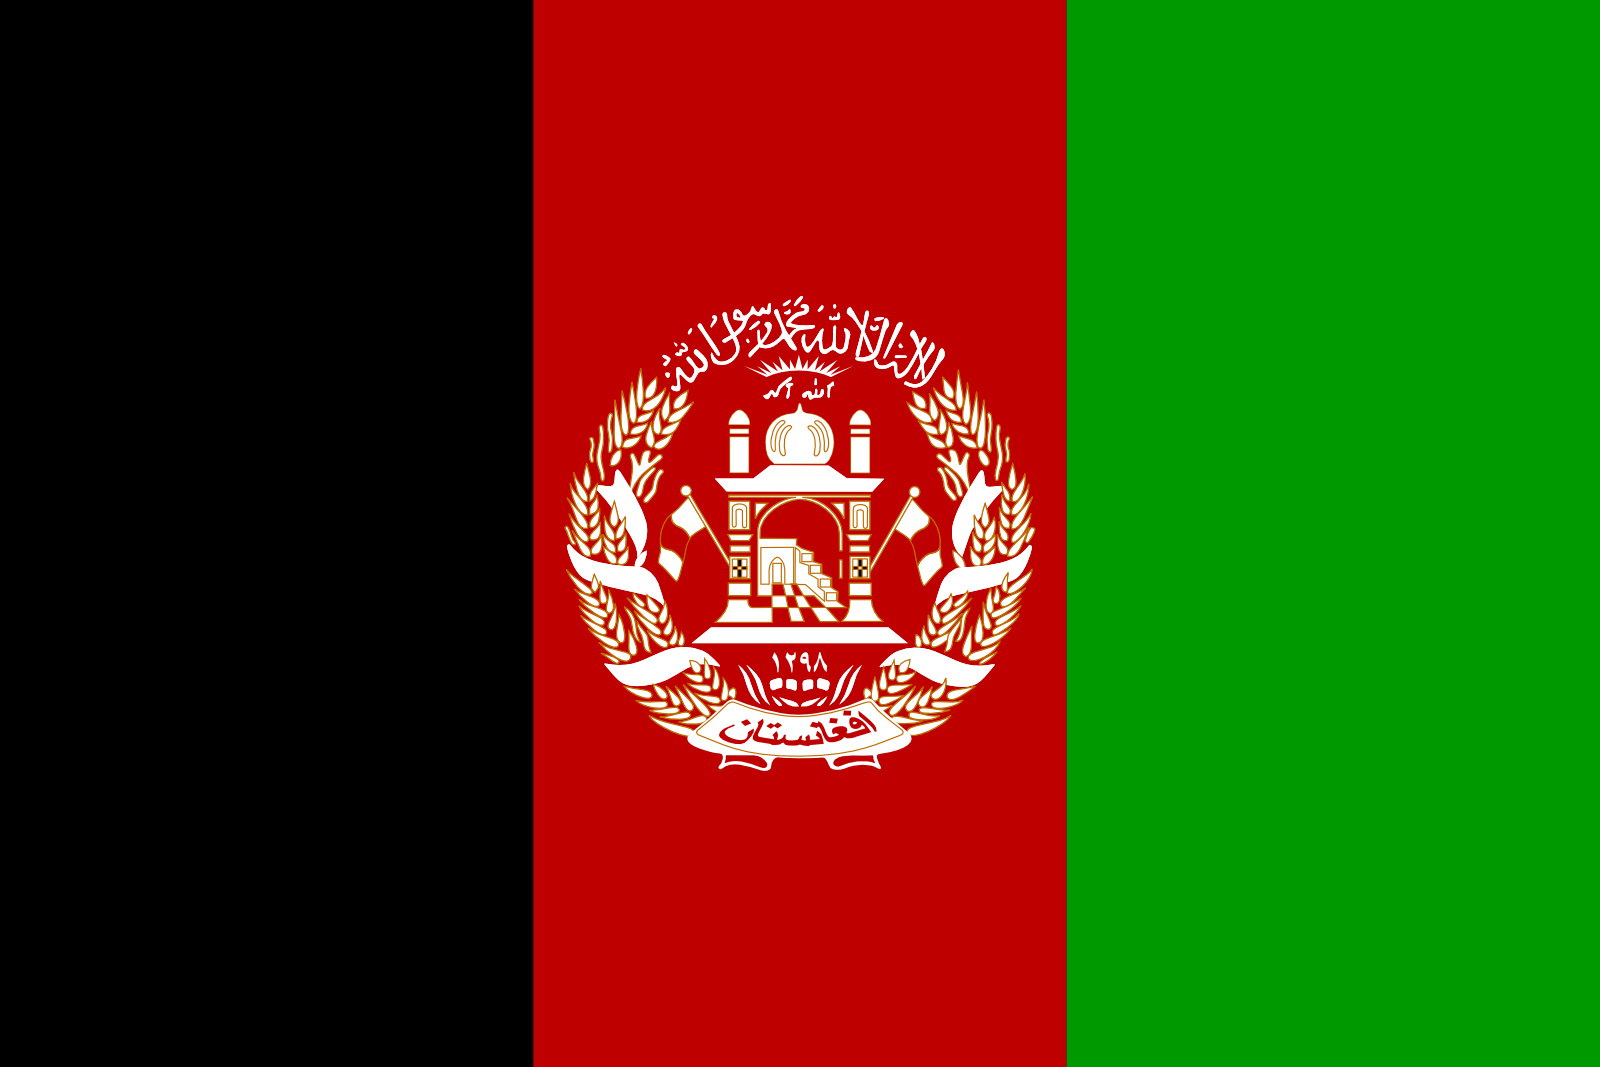 Afghanistans Flagge